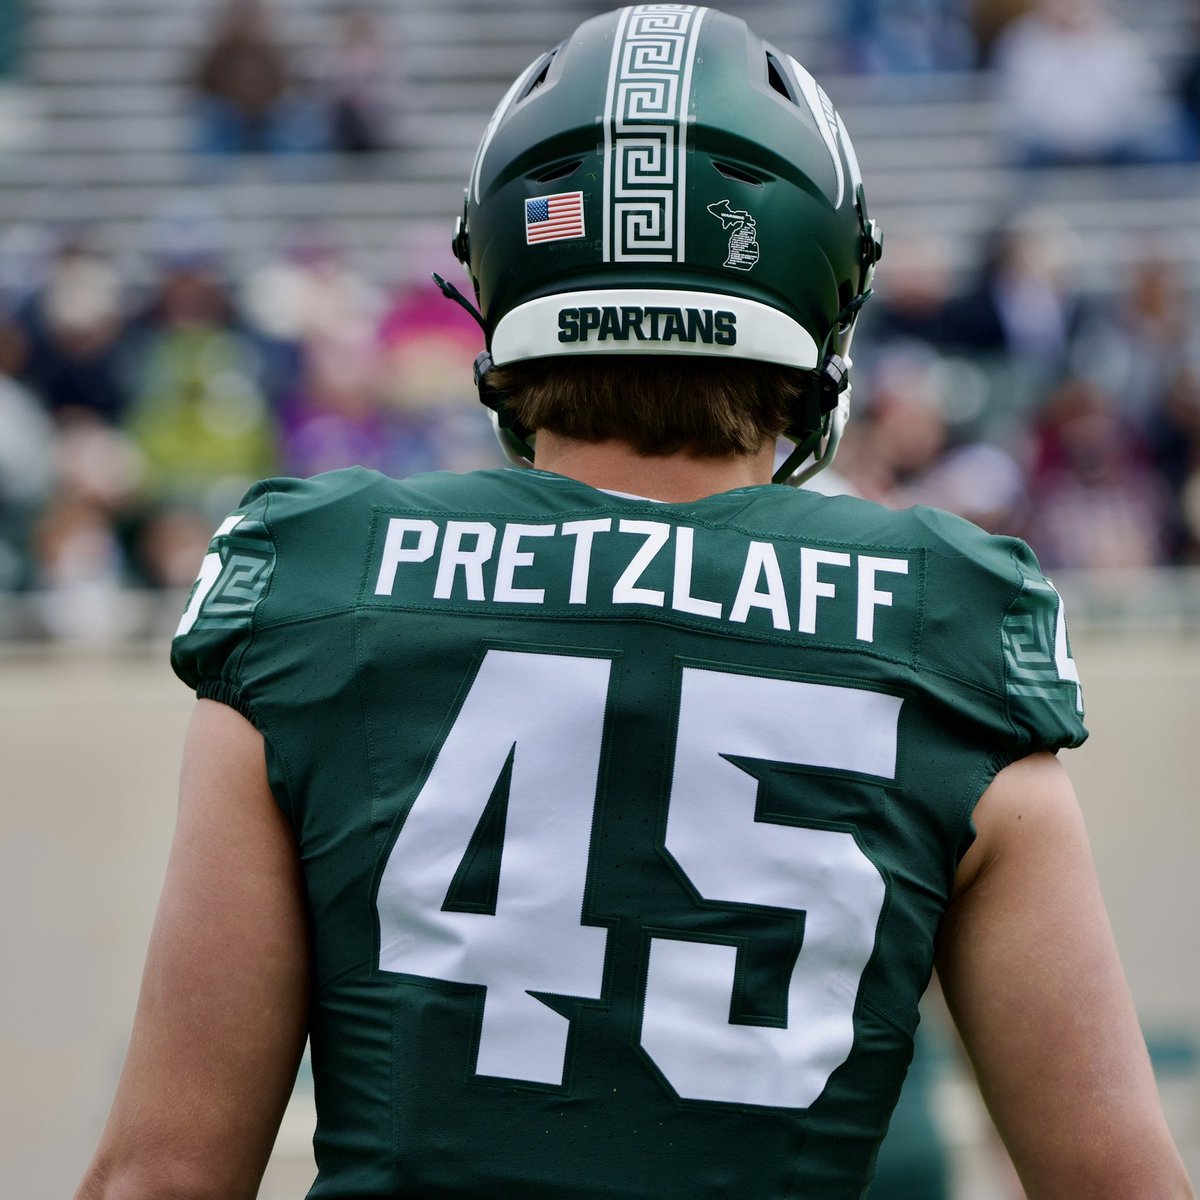 Awesome first semester as a Spartan!! So proud of #45 (might need to respell the last name “Pretzloff” so people say it right!!!!) @brady_pretzlaff @JeffPretz